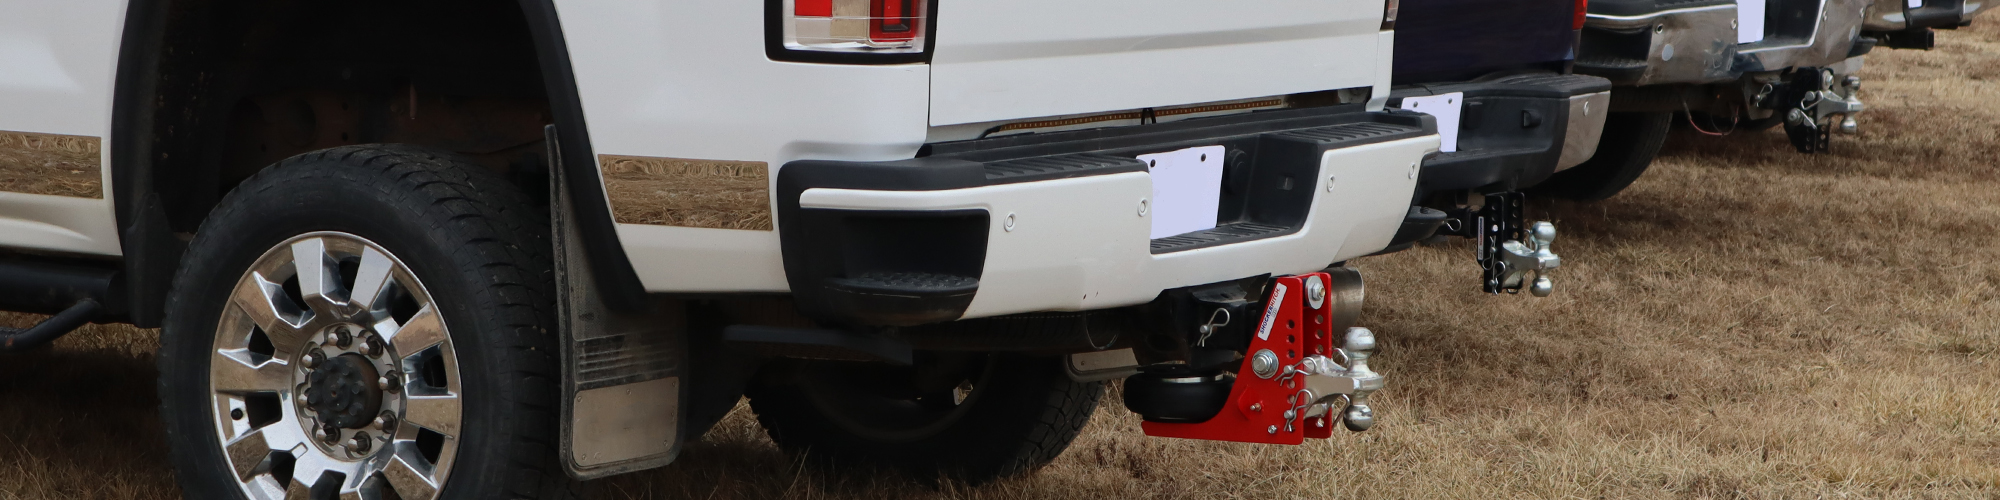 Bumper Hitches
Solid to air ride options